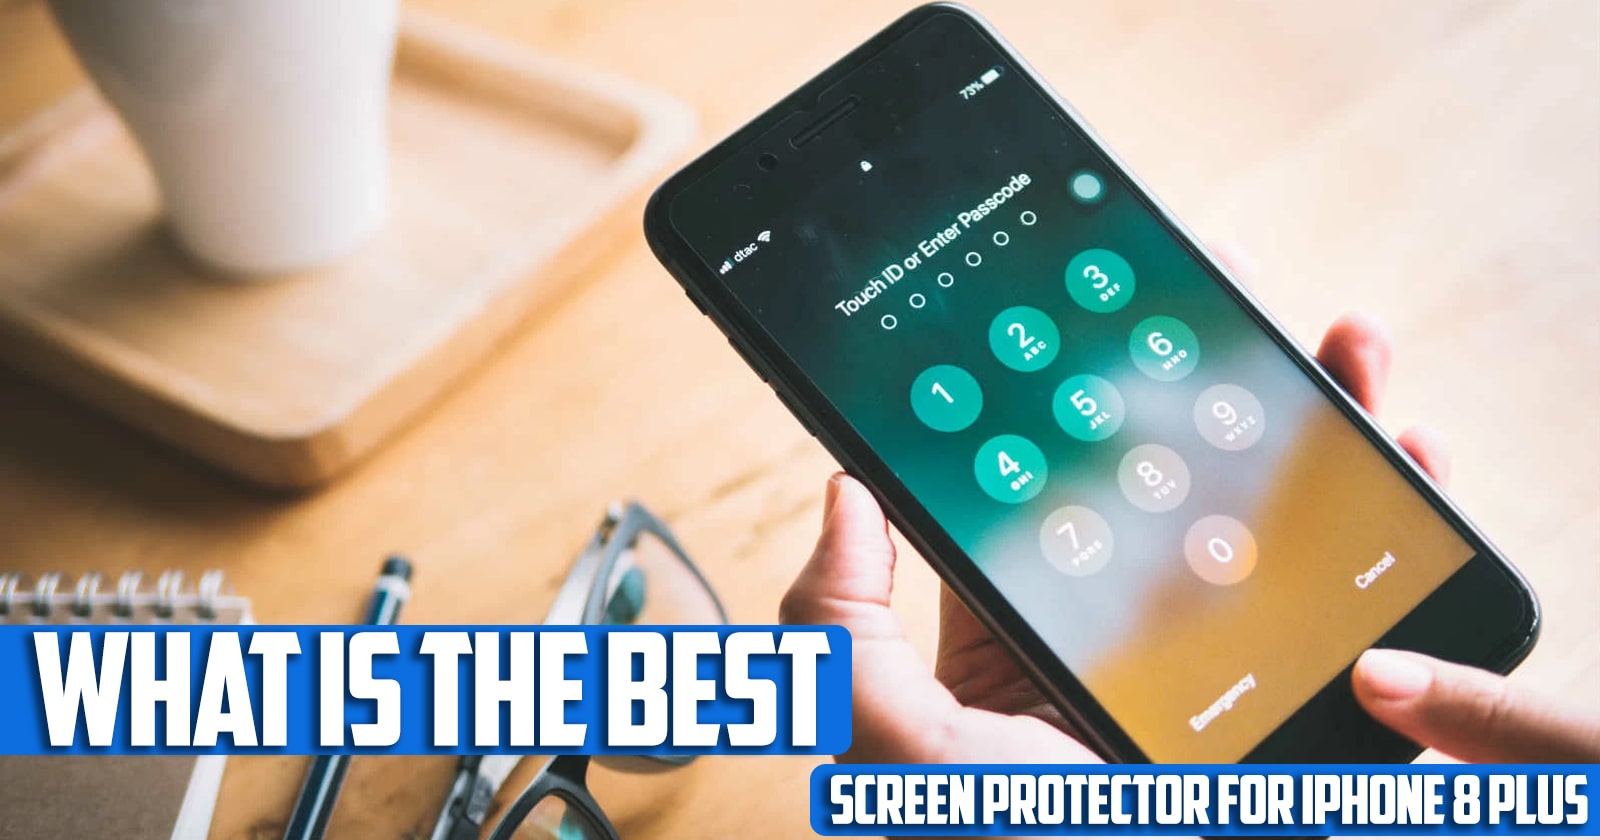 What Is the Best Screen Protector for iPhone 8 Plus